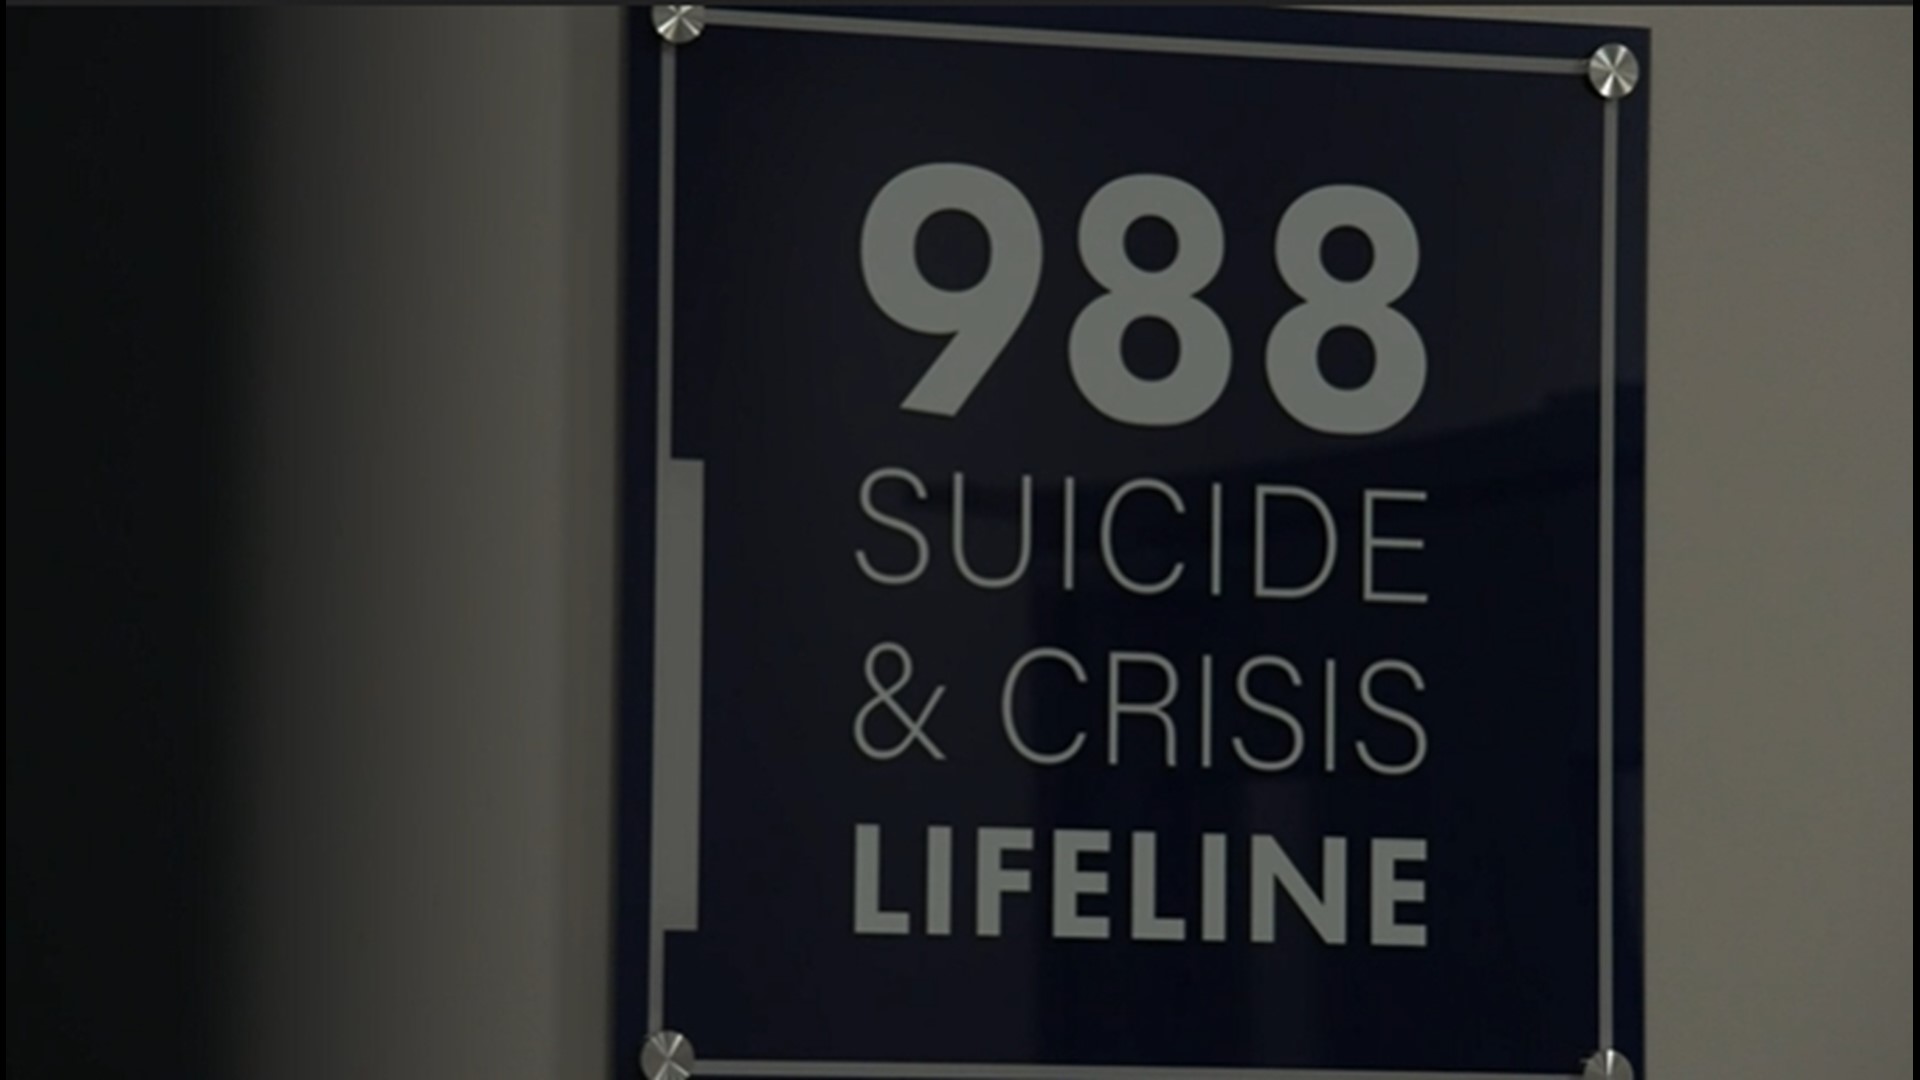 Indigenous people die by suicide at a rate 20% higher than the rest of the population. In response, the country's first Native Crisis Hotline Center was opened.